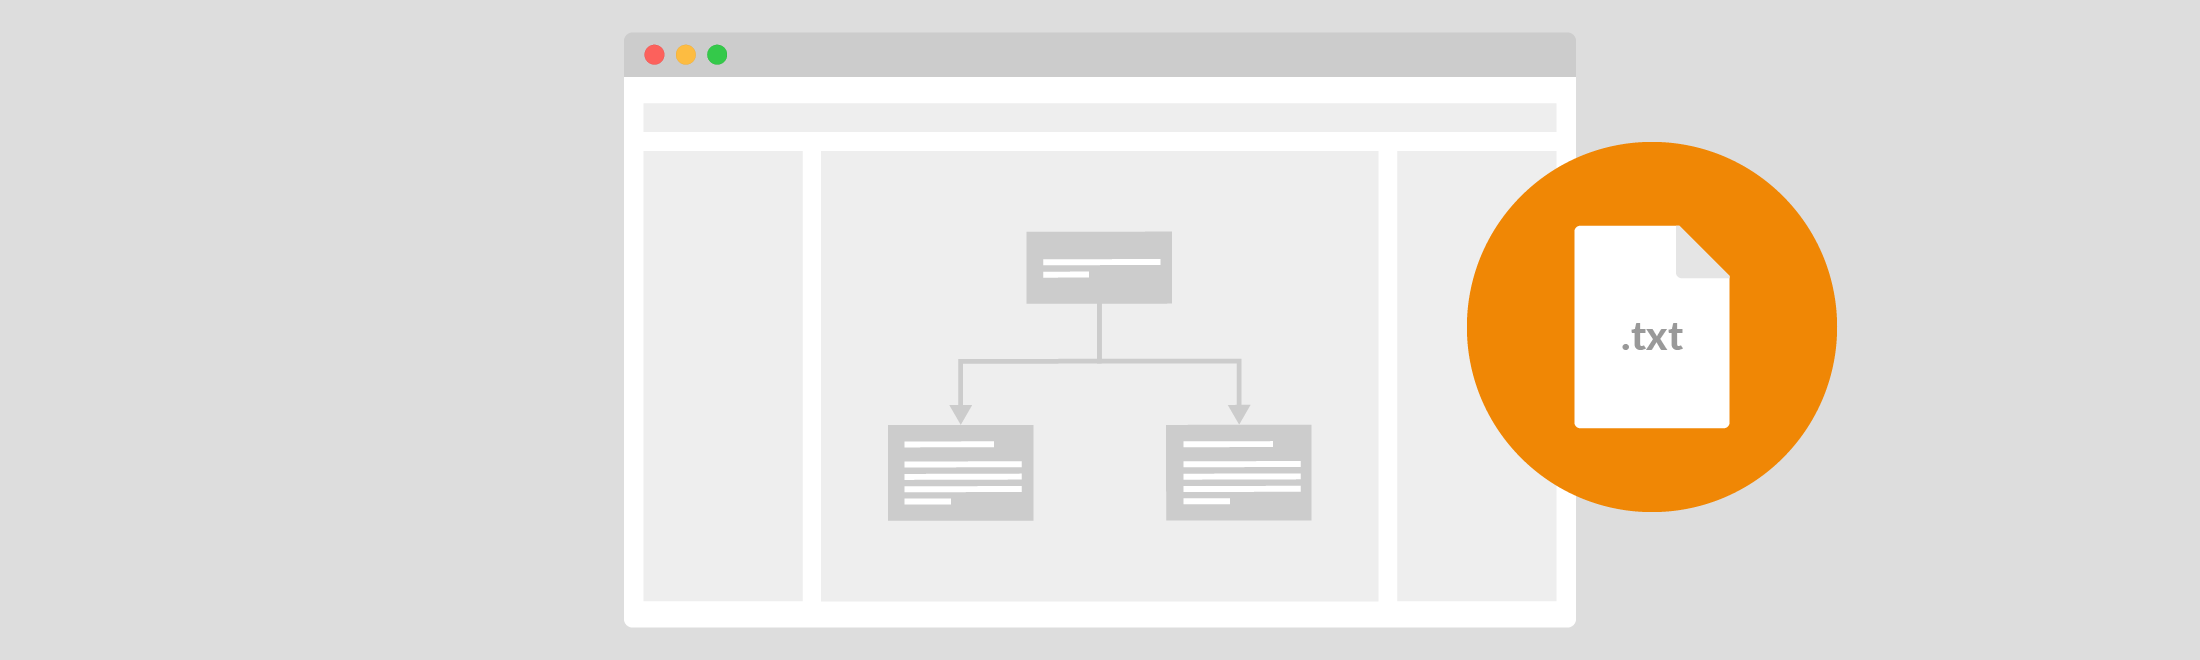 Using the draw.io text plugin, you can extract the text directly from any flowchart, diagram, or even infographic.